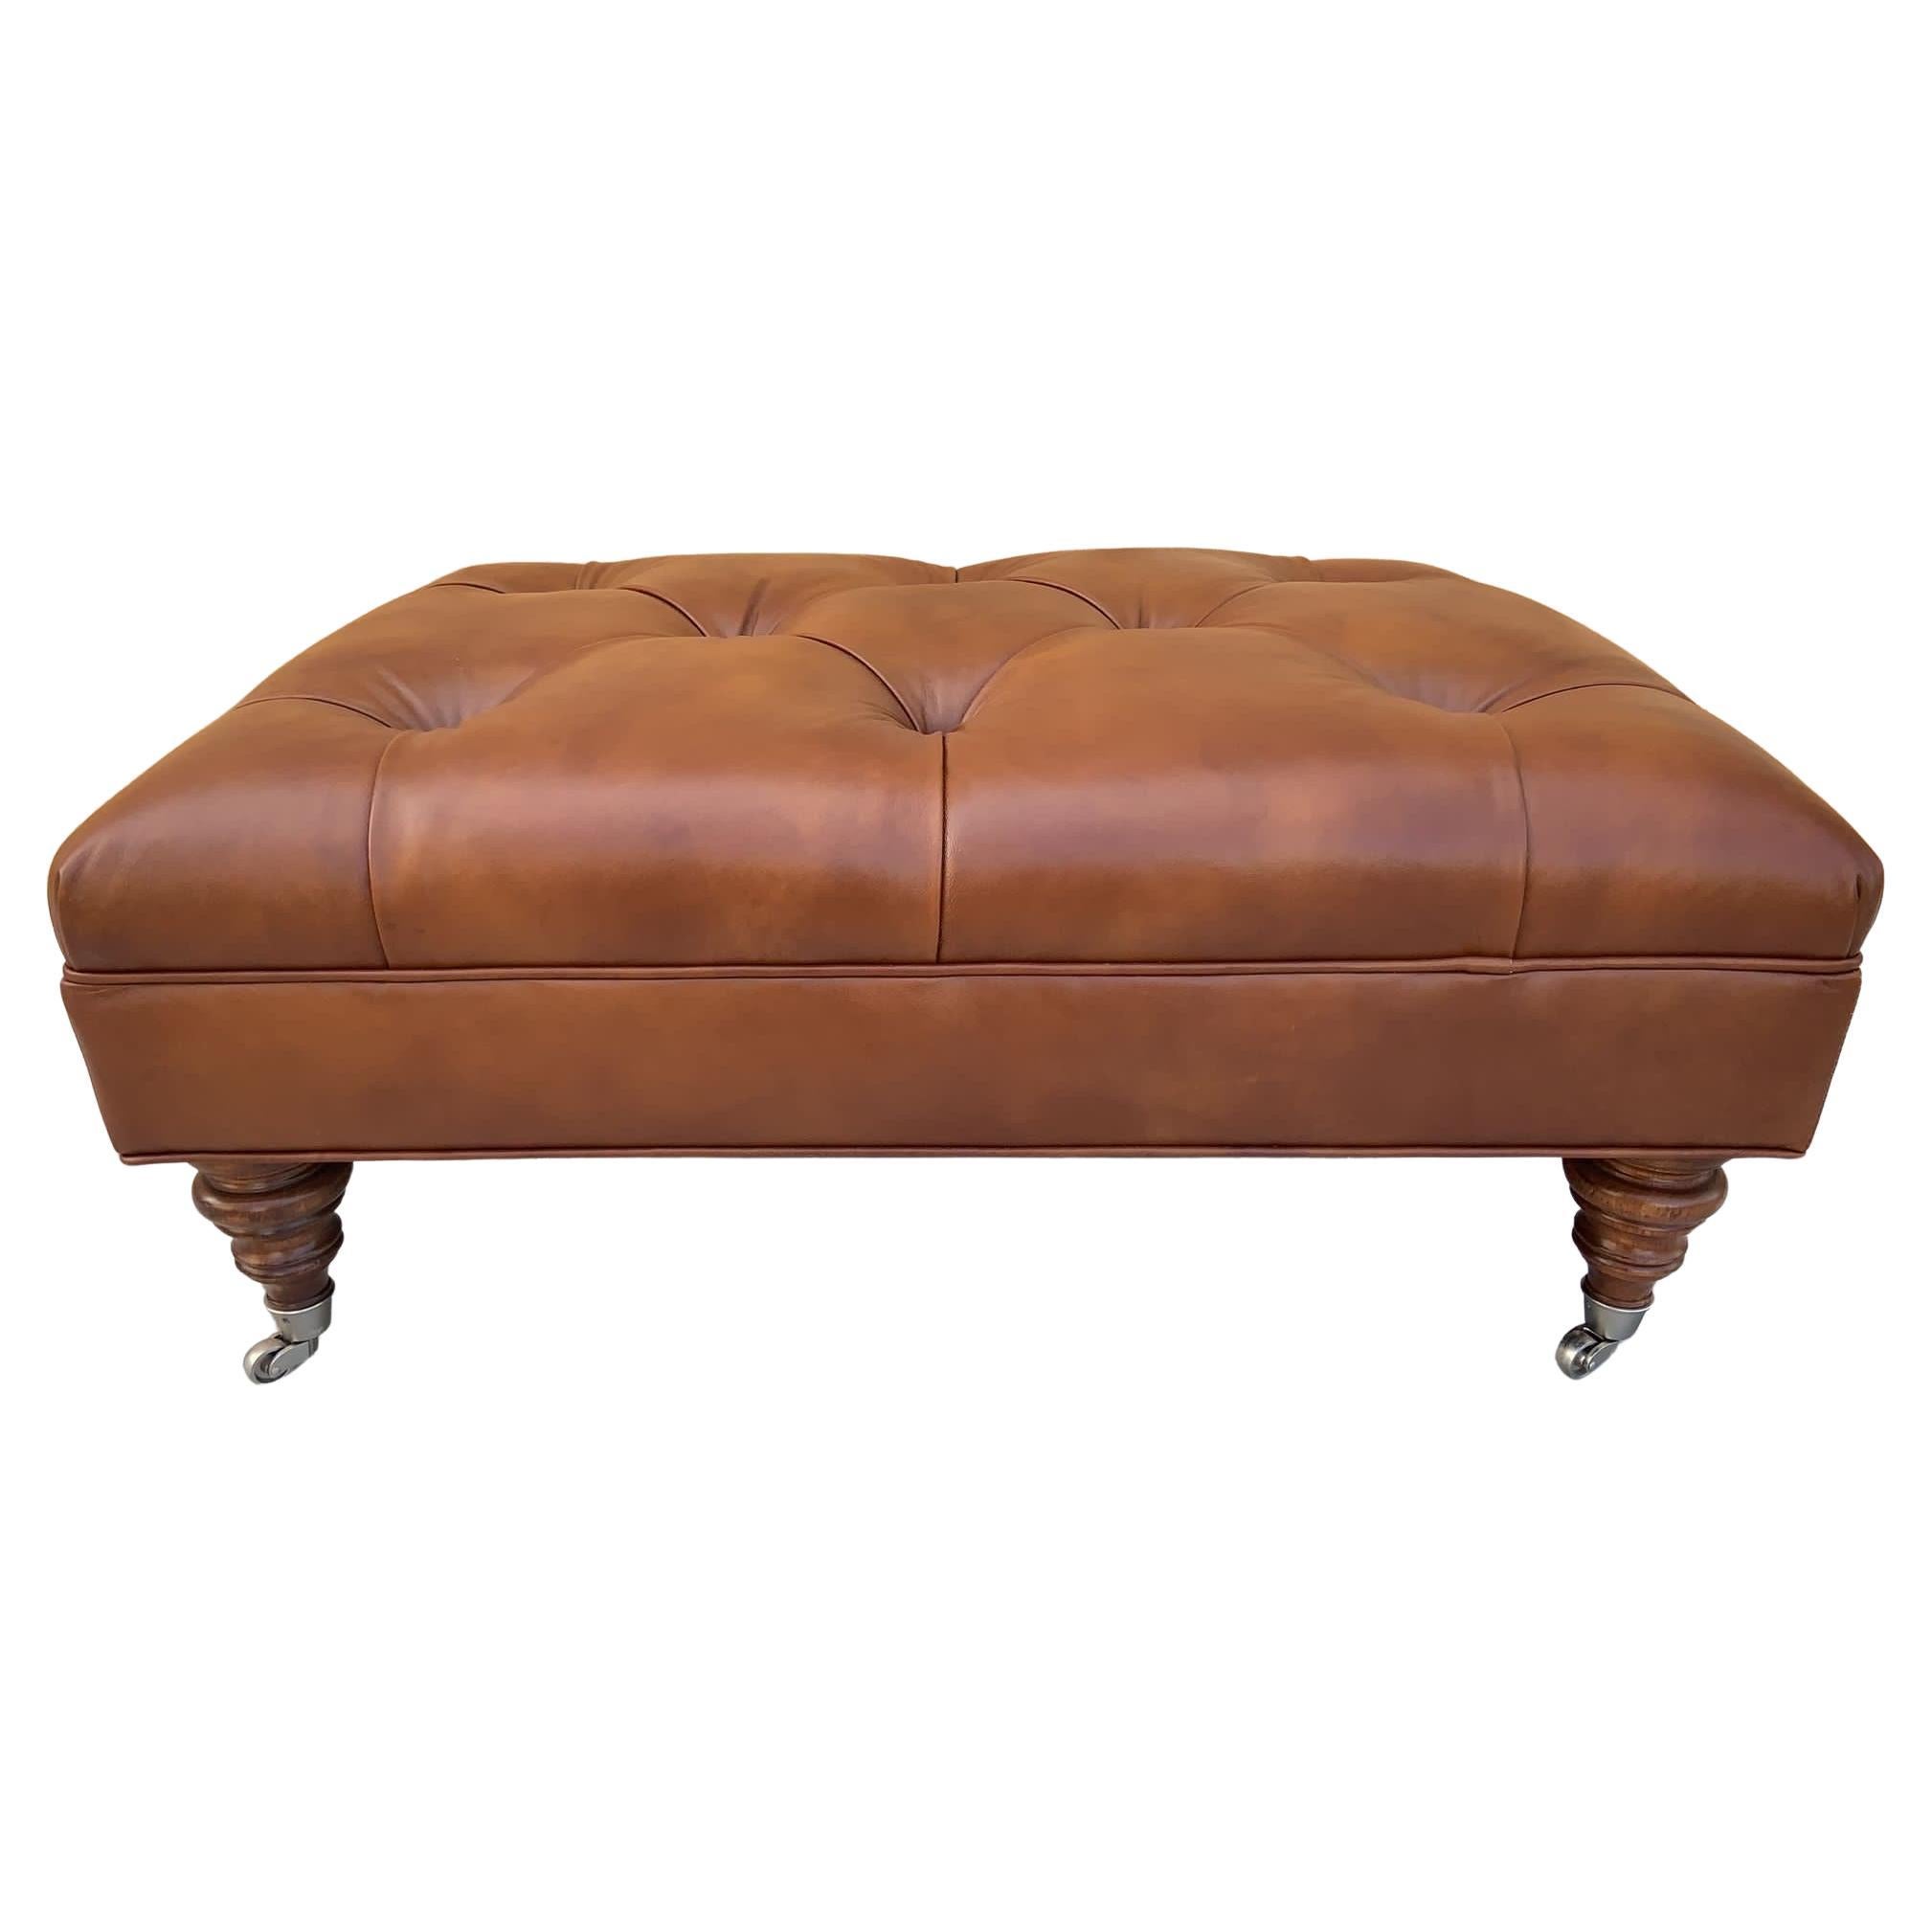 Vintage English Chesterfield Style Leather Tufted Ottoman